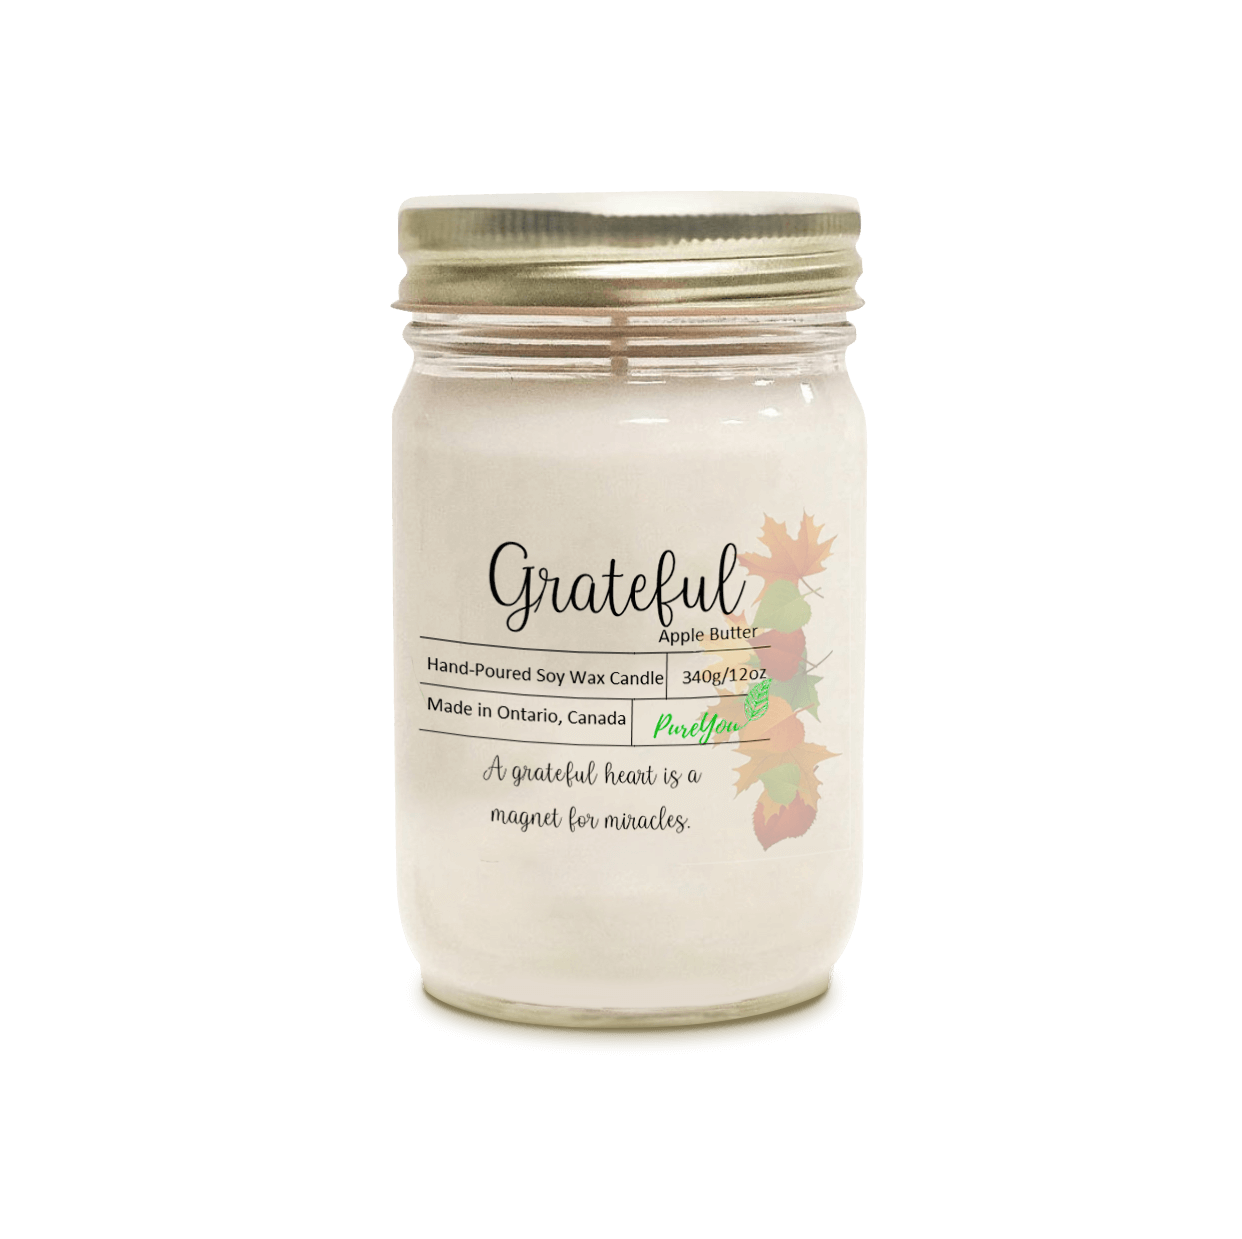 Grateful Soy Wax Candle (Apple Butter)